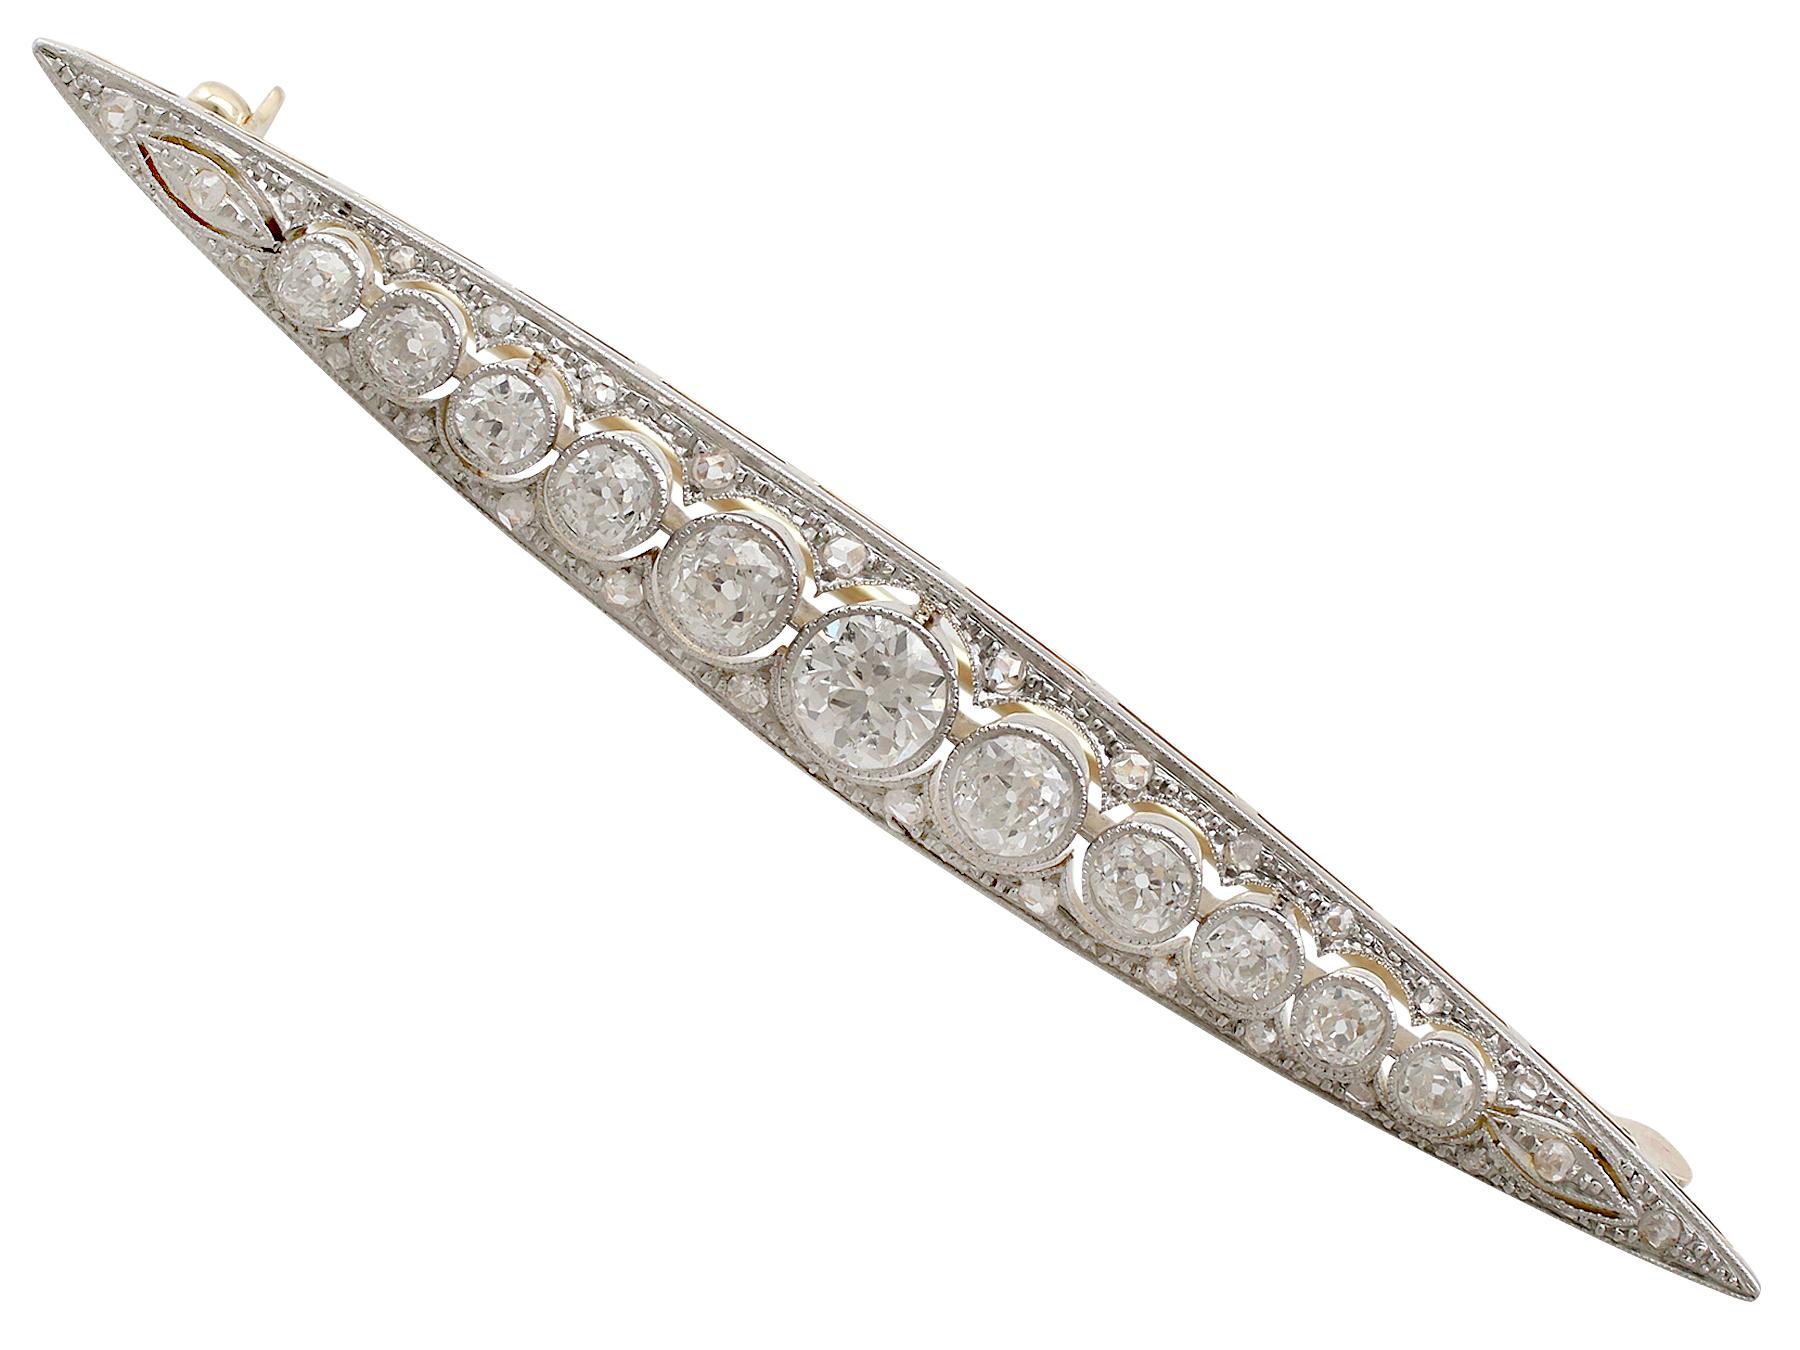 A stunning antique 2.02 Carat diamond and 14 karat yellow gold, platinum bar brooch; part of our diverse antique jewellery and estate jewelry collections.

This stunning, fine and impressive diamond bar brooch has been crafted in 14k gold with a